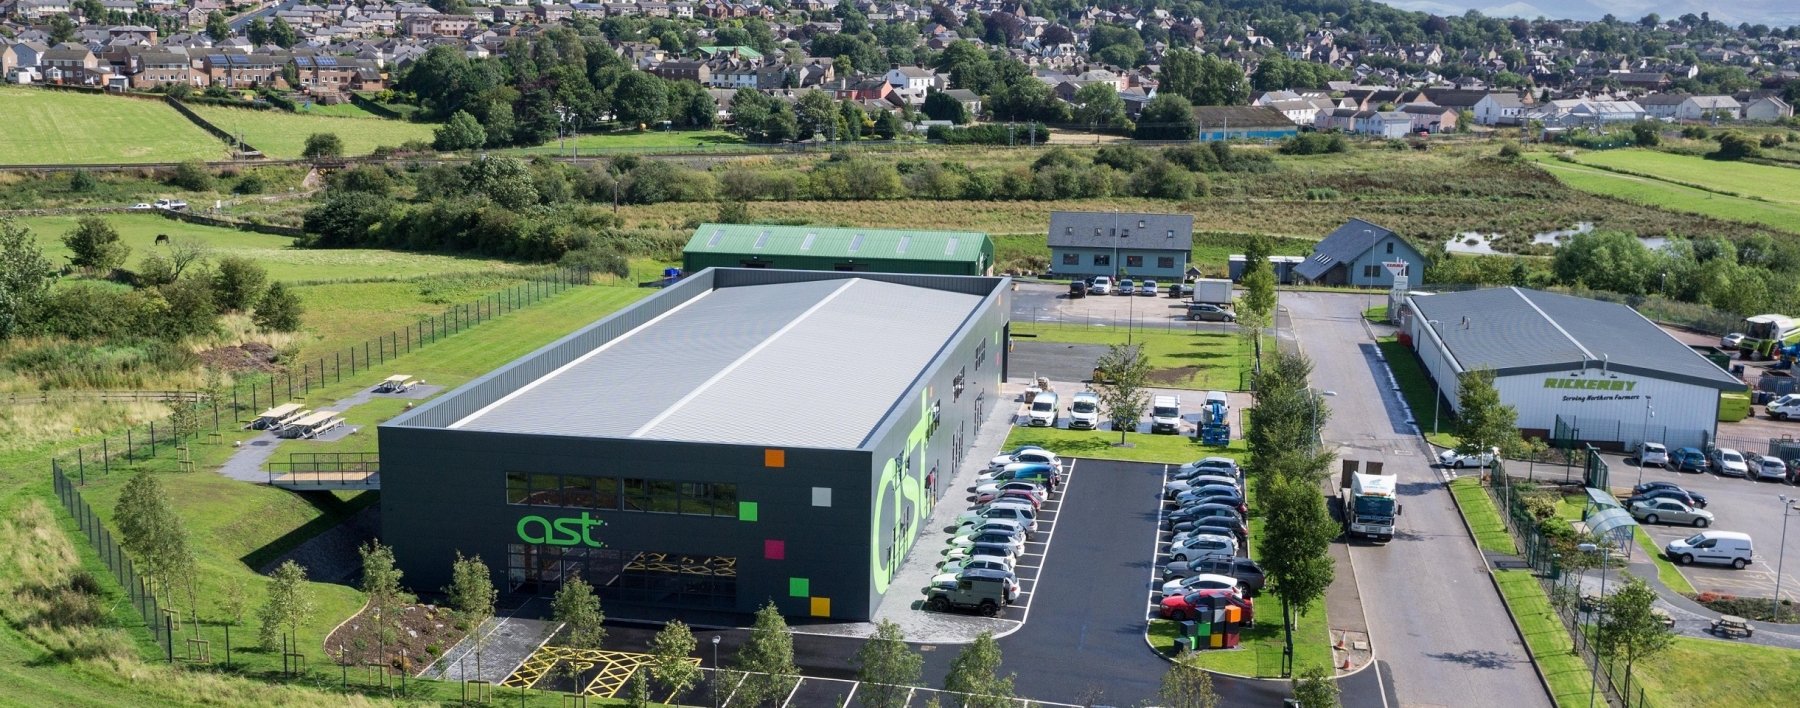 Ast Signs new purpose built head office